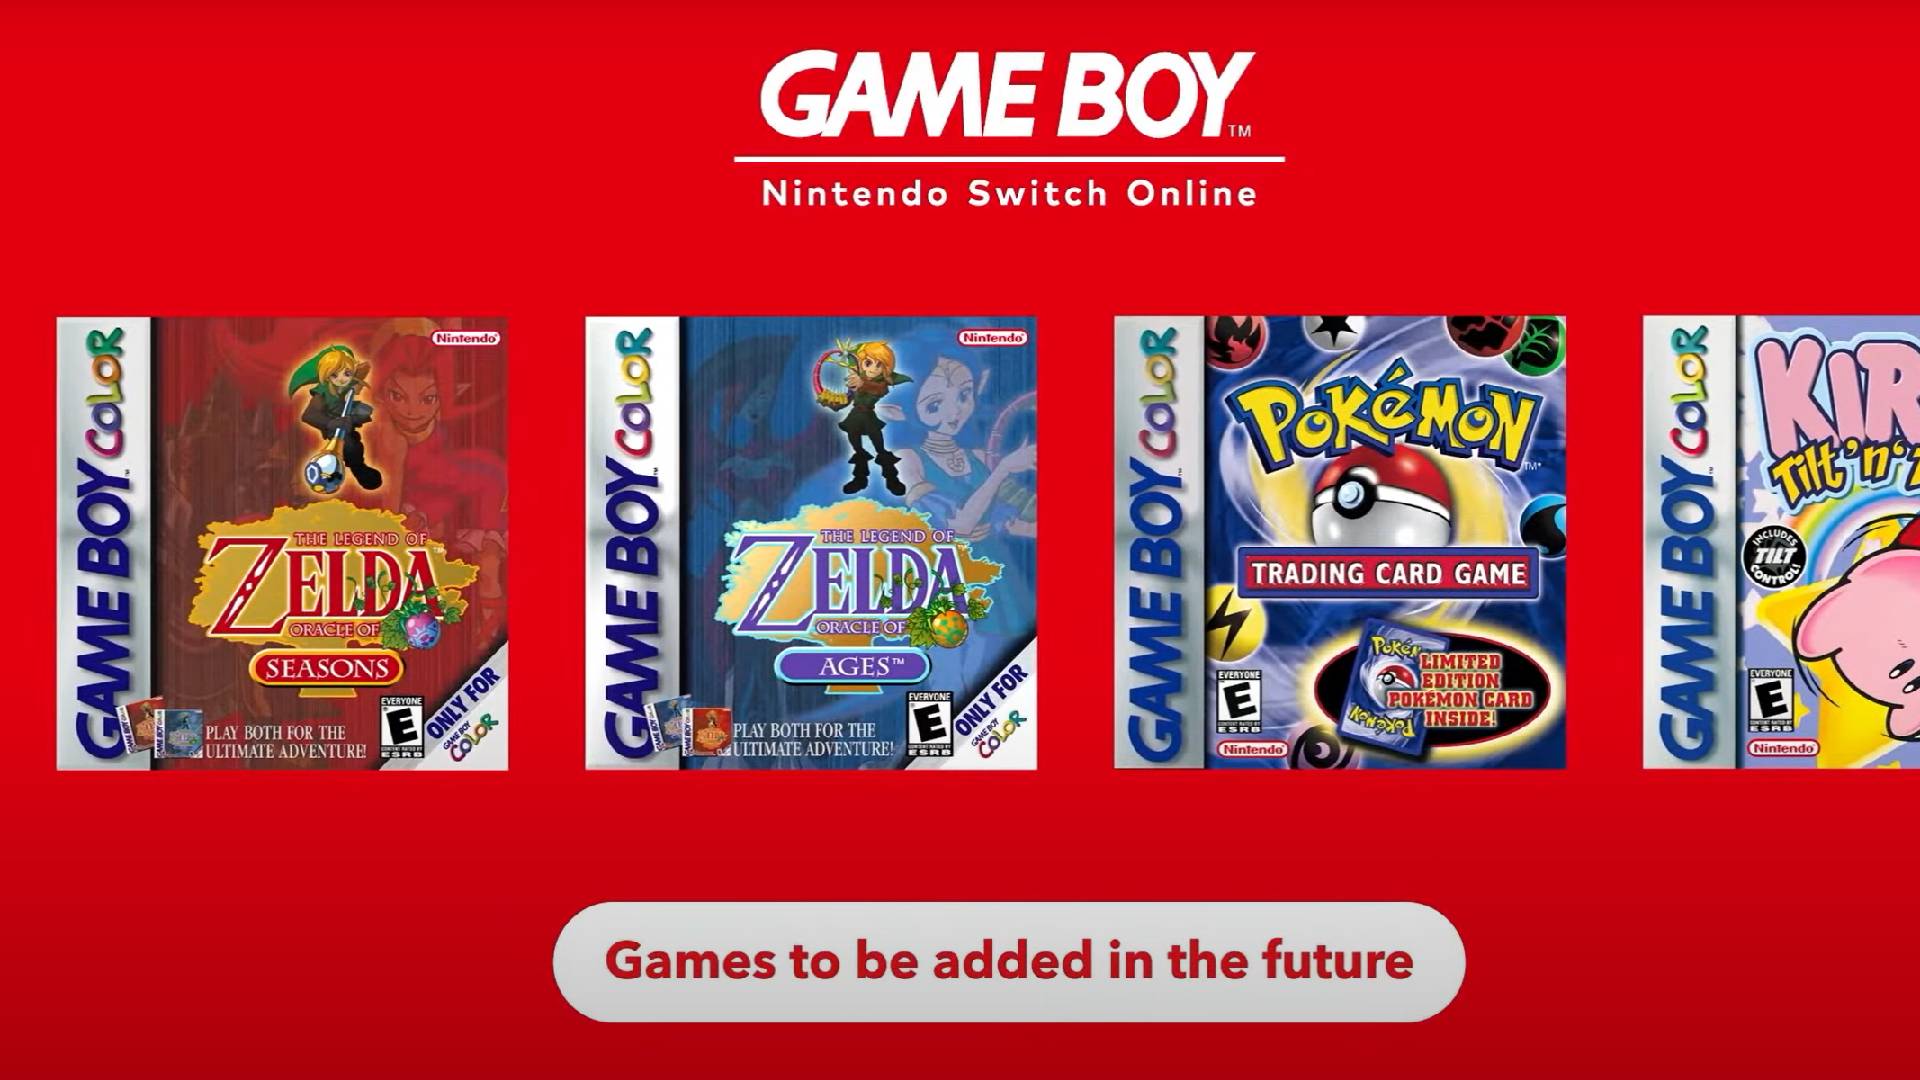 GBA Games reportedly arriving on Nintendo Switch Online service